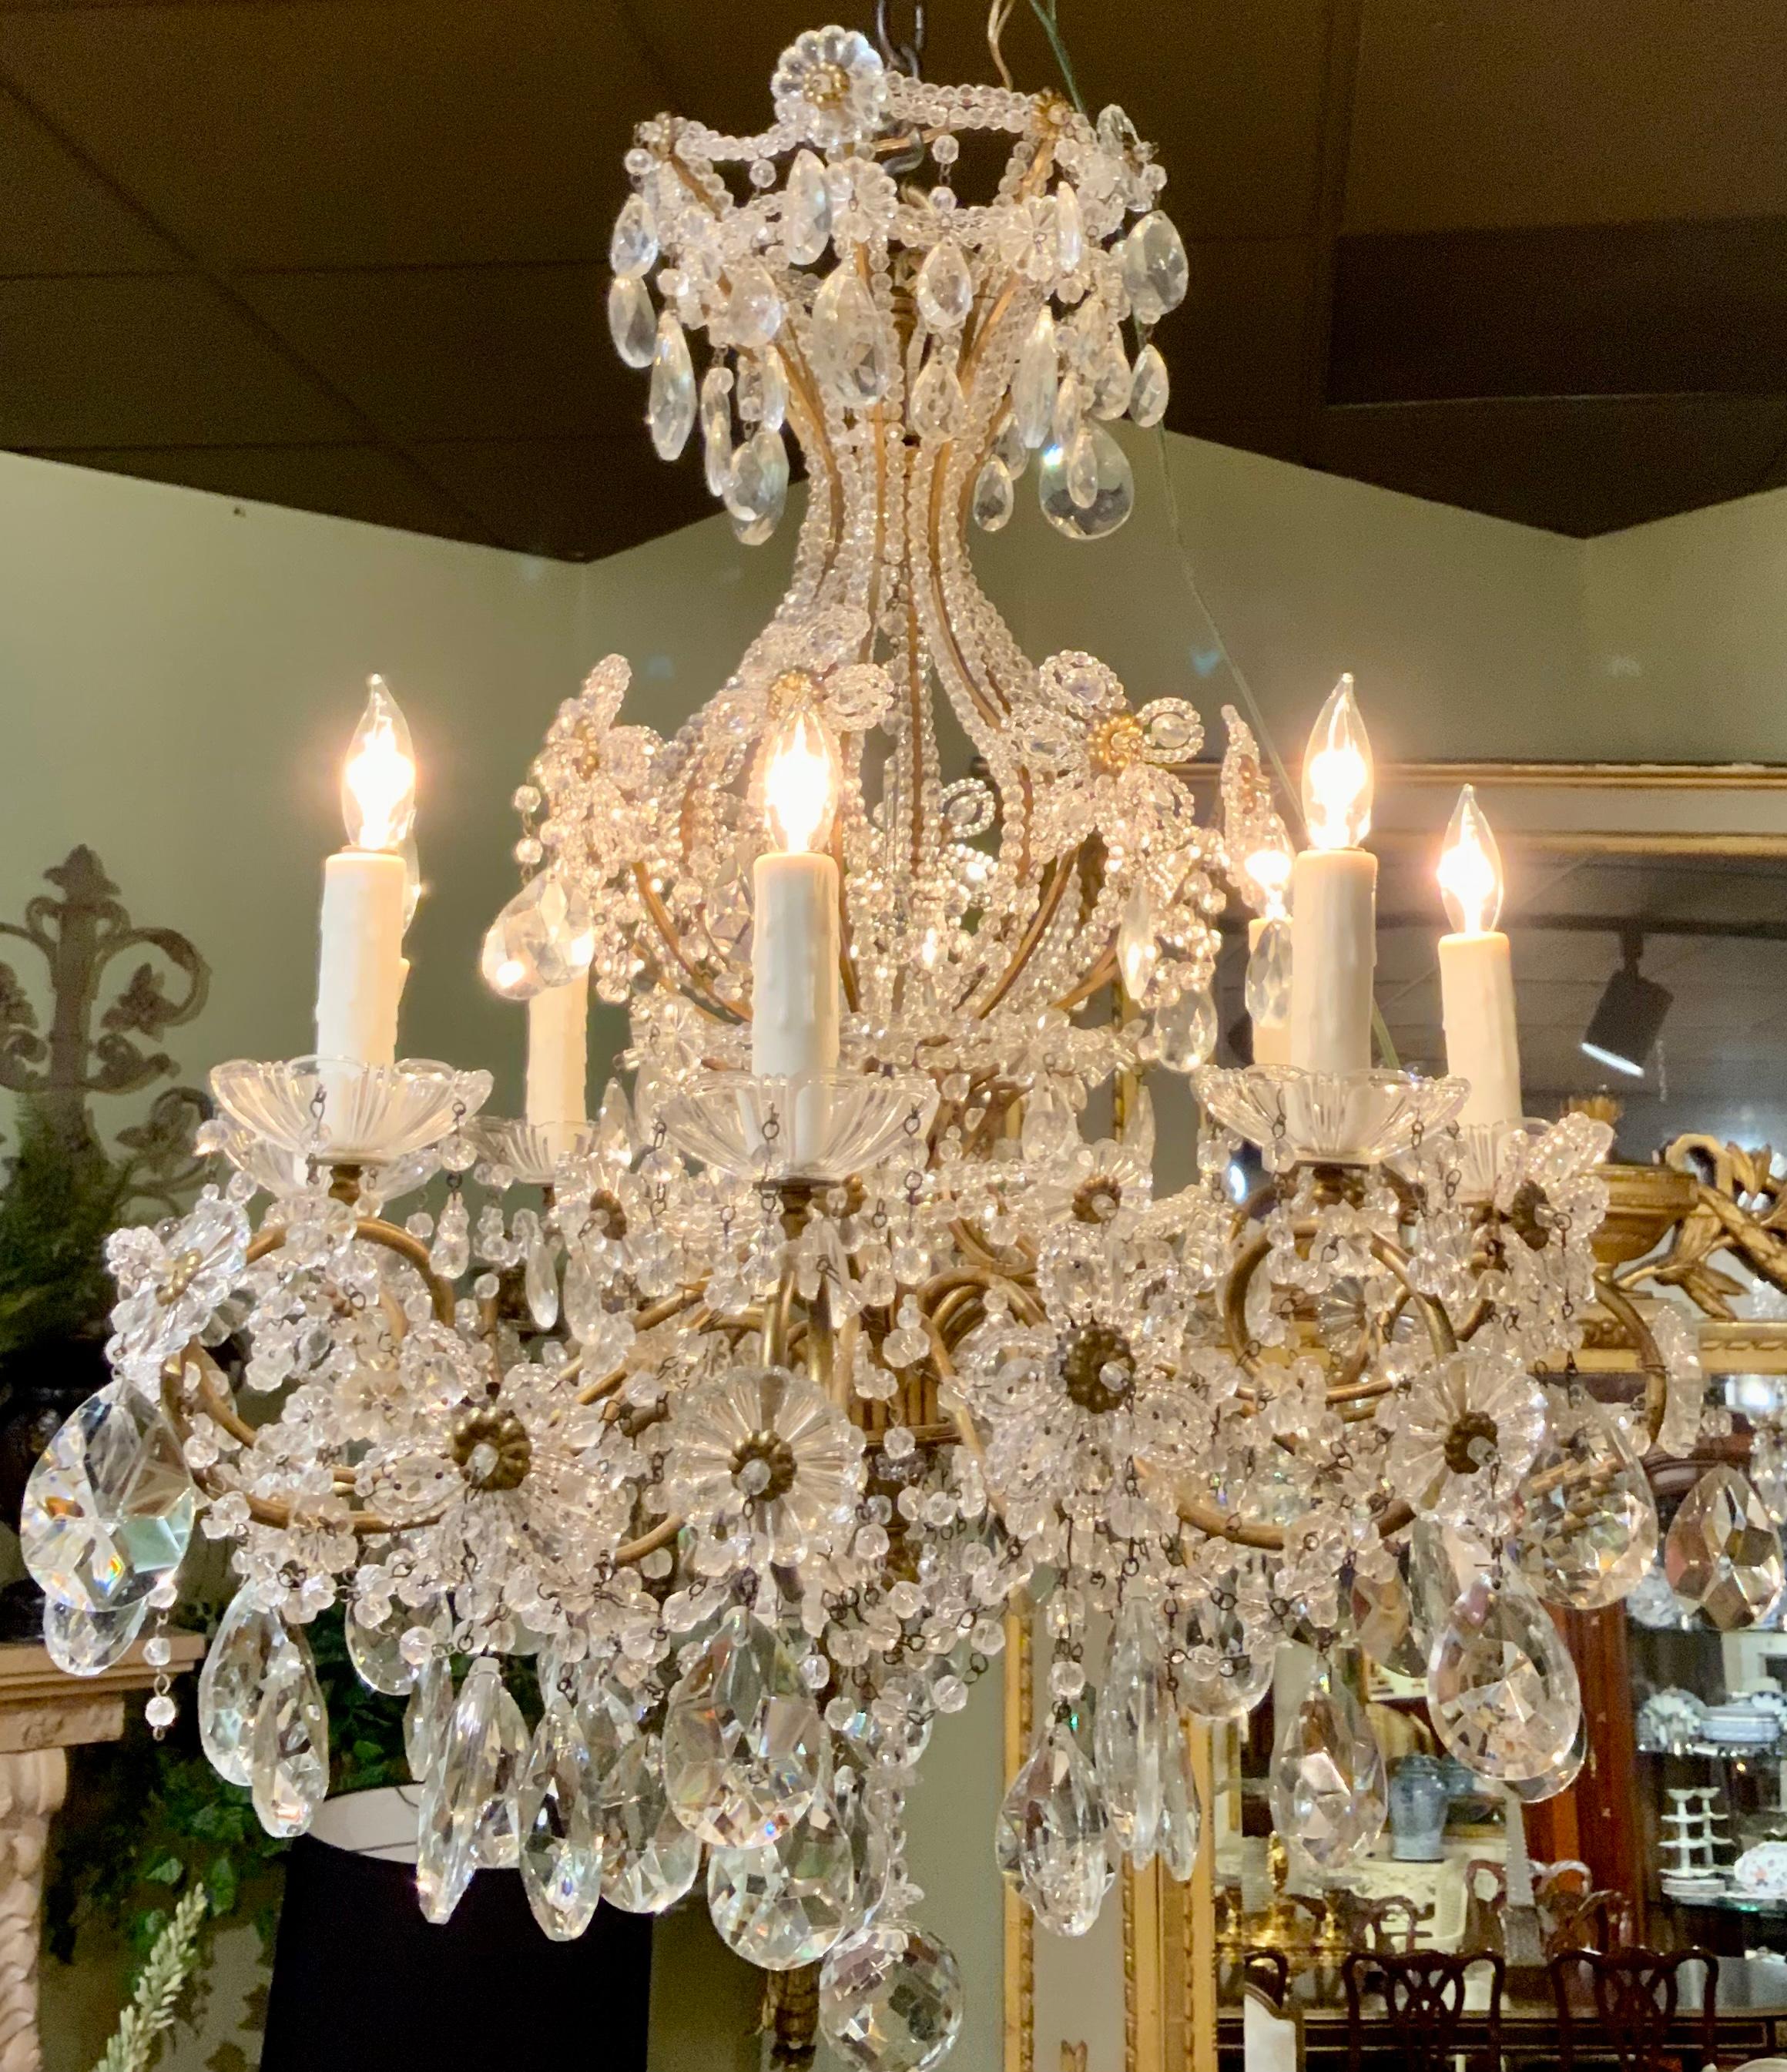 This eight light chandelier is in very good condition with good wiring
And clear crystal. The brass frame is gilt with the original bright patina.
It has a vasiform frame with glass beading, supporting eight scrolled
Candle arms set with molded